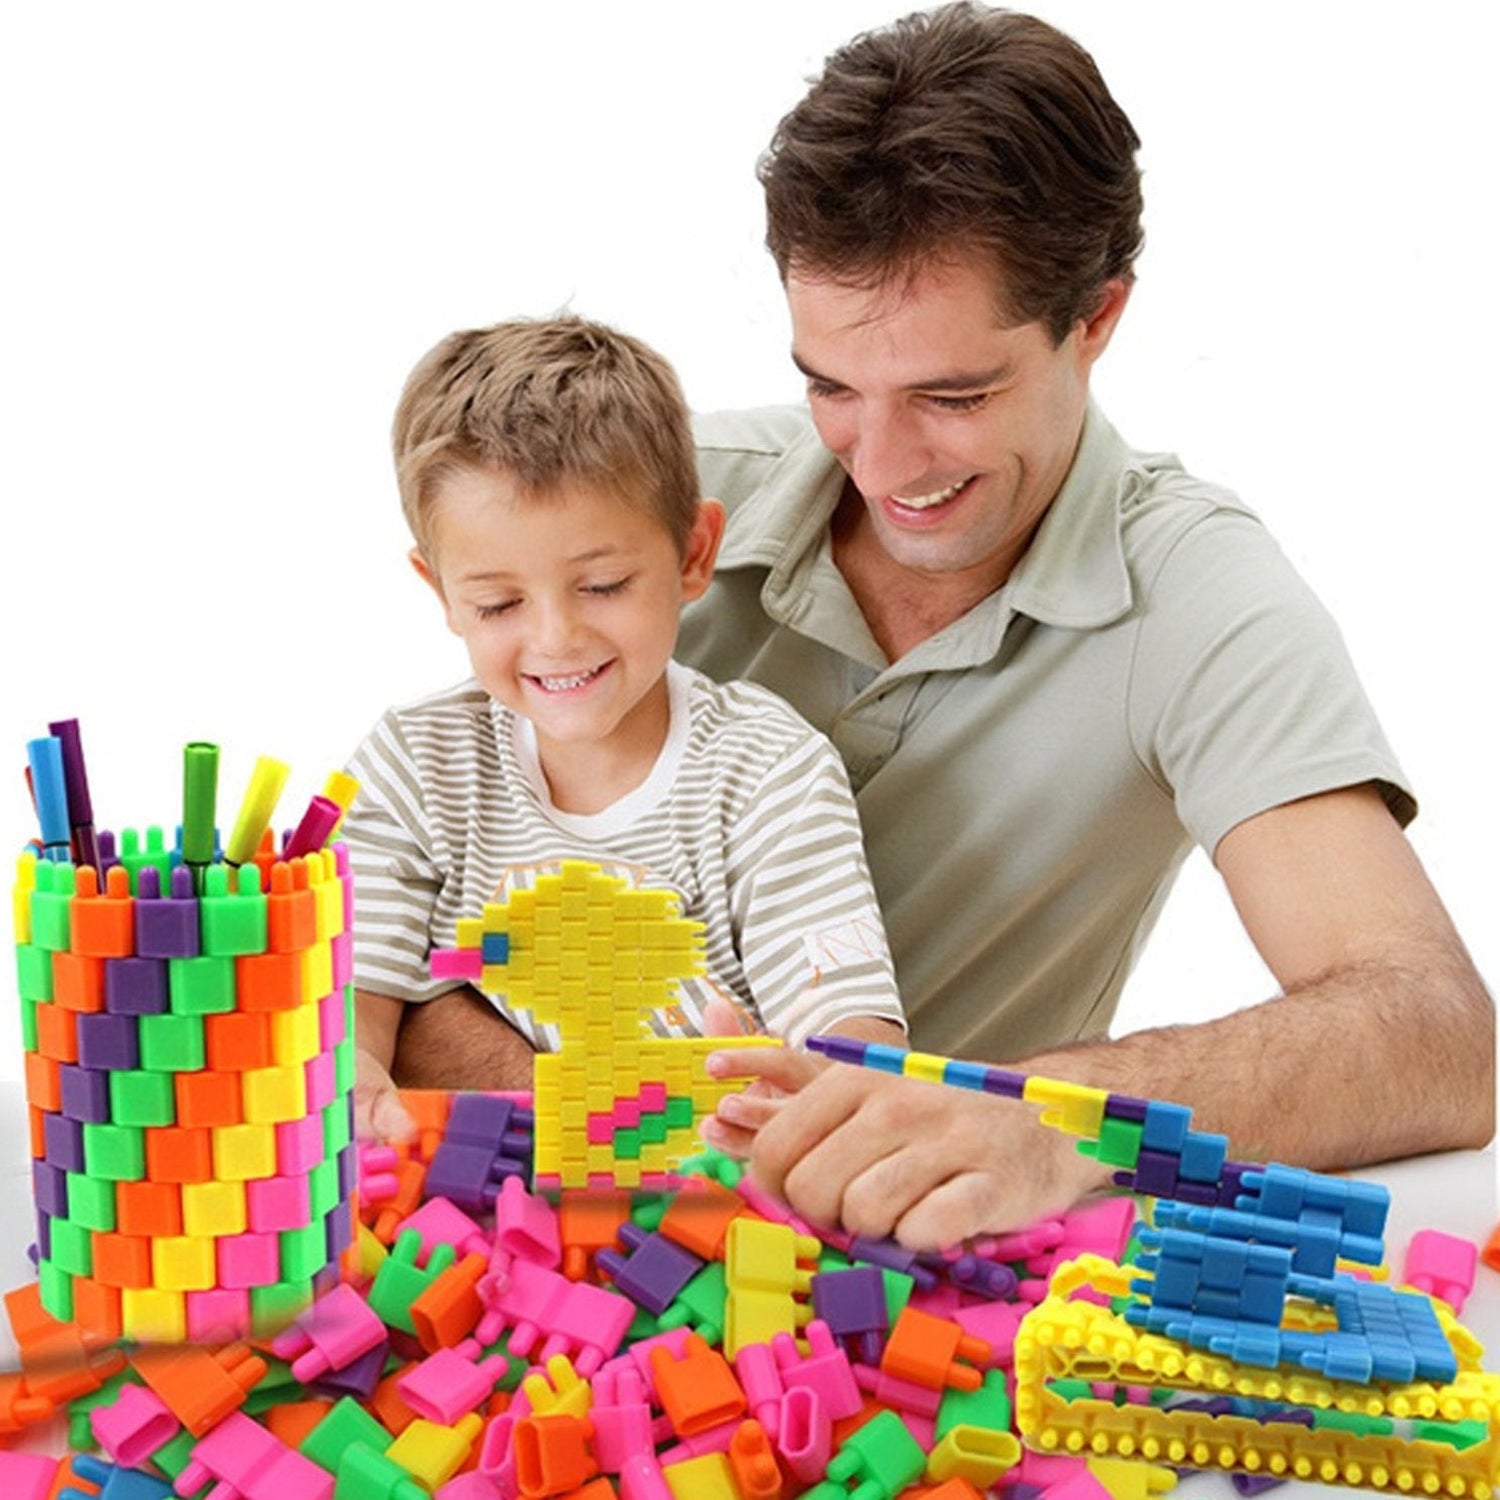 3906 250 Pc Bullet Toy used in all kinds of household and official places by kids and children's specially for playing and enjoying purposes. 